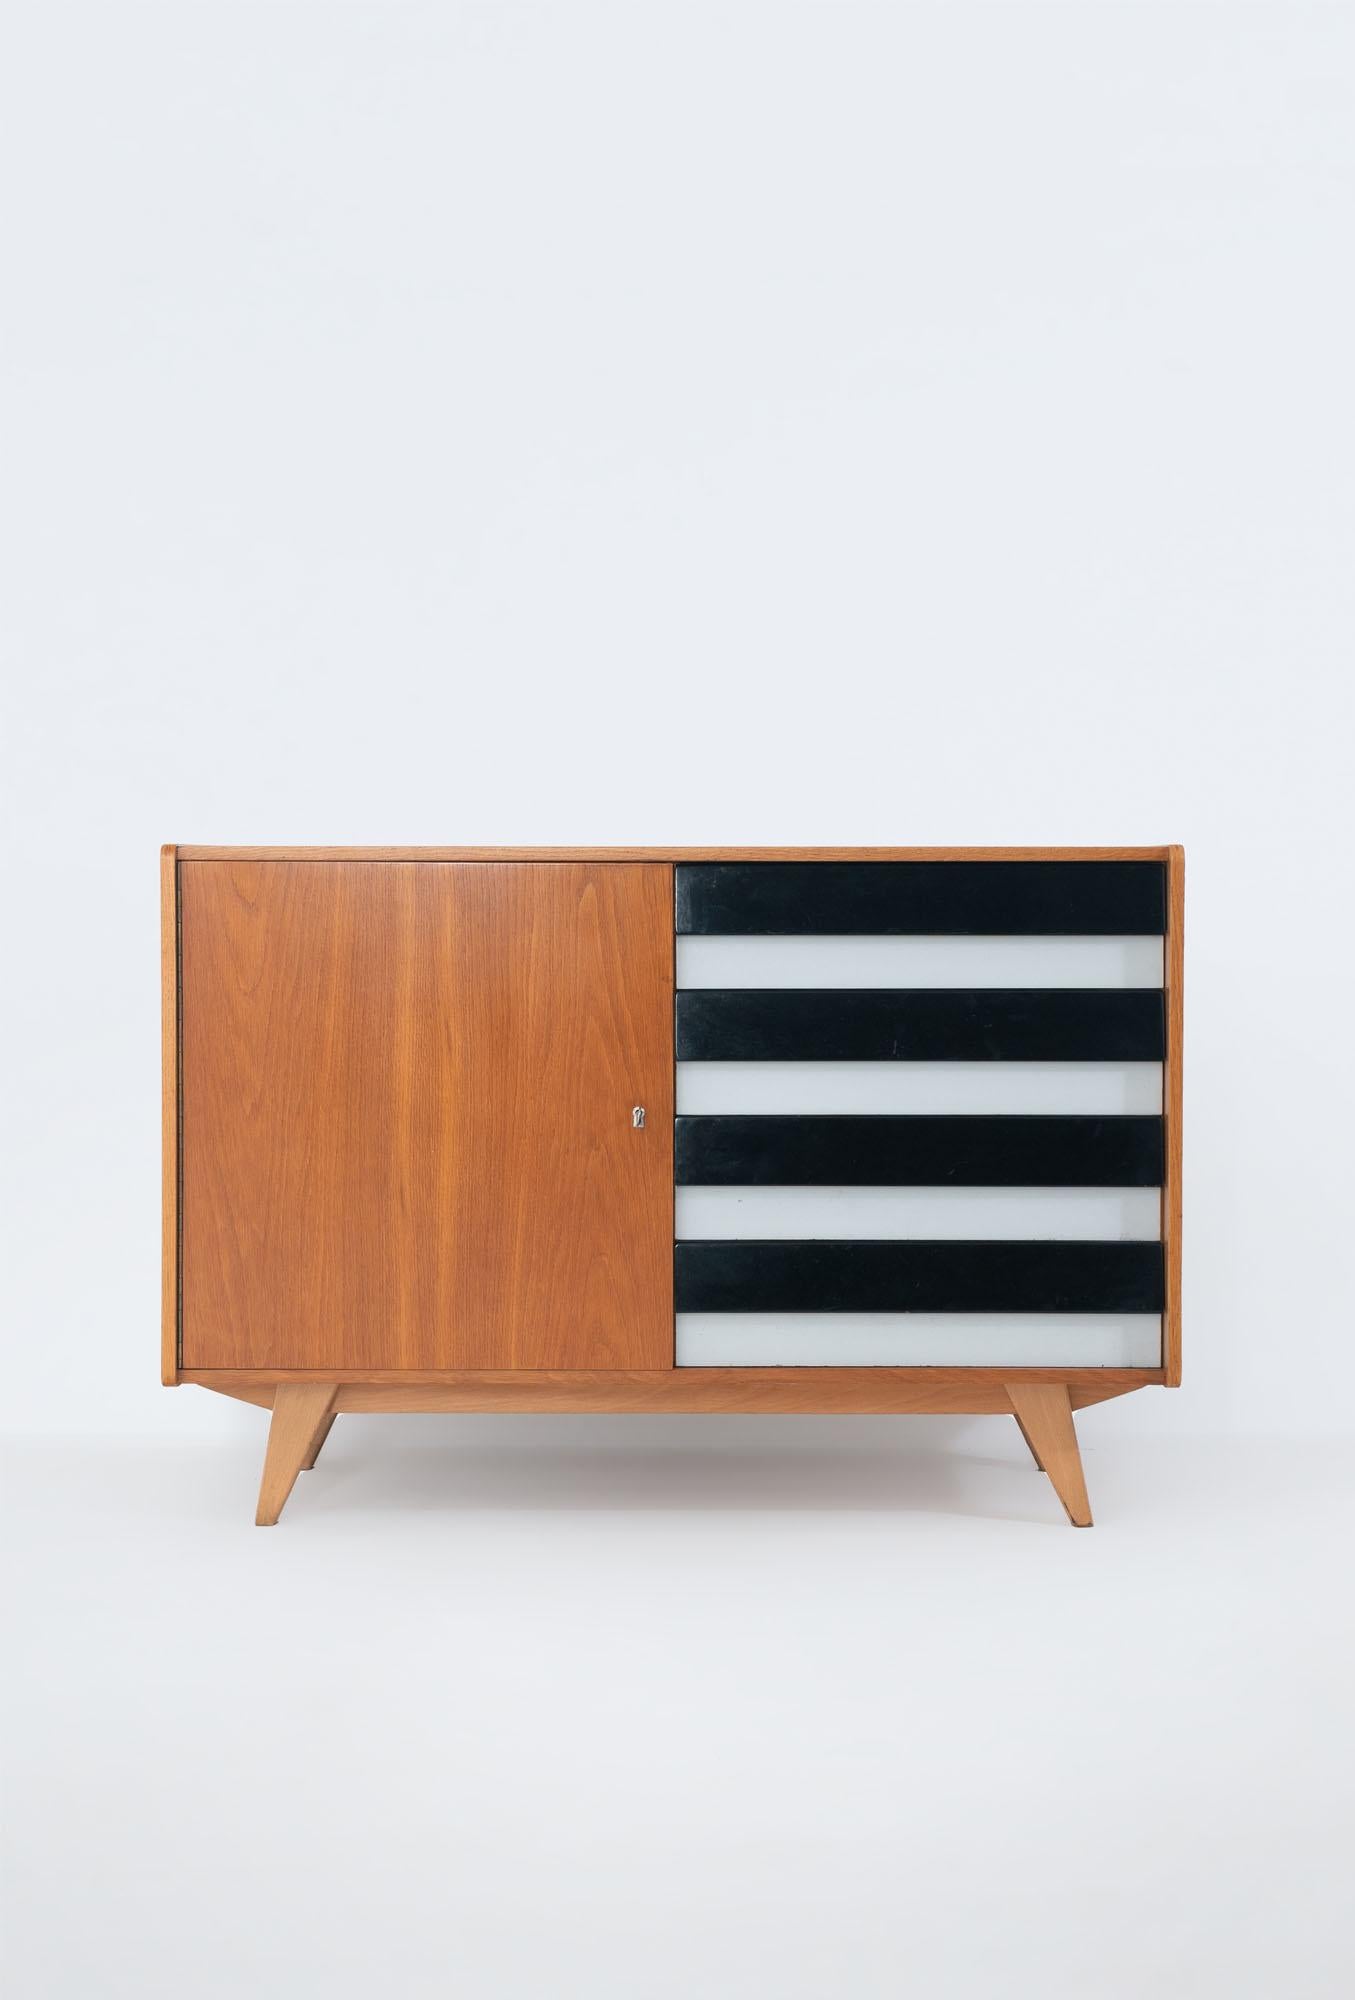 U-458 sideboard by Jiri Jiroutek for Interier Praha, former Czechoslovakia, 1960s. 
Oak veneered body with mahogany inside which makes a nice contrast. 
Plastic drawers with white formica and glossy black front. 
Wood refinished with new